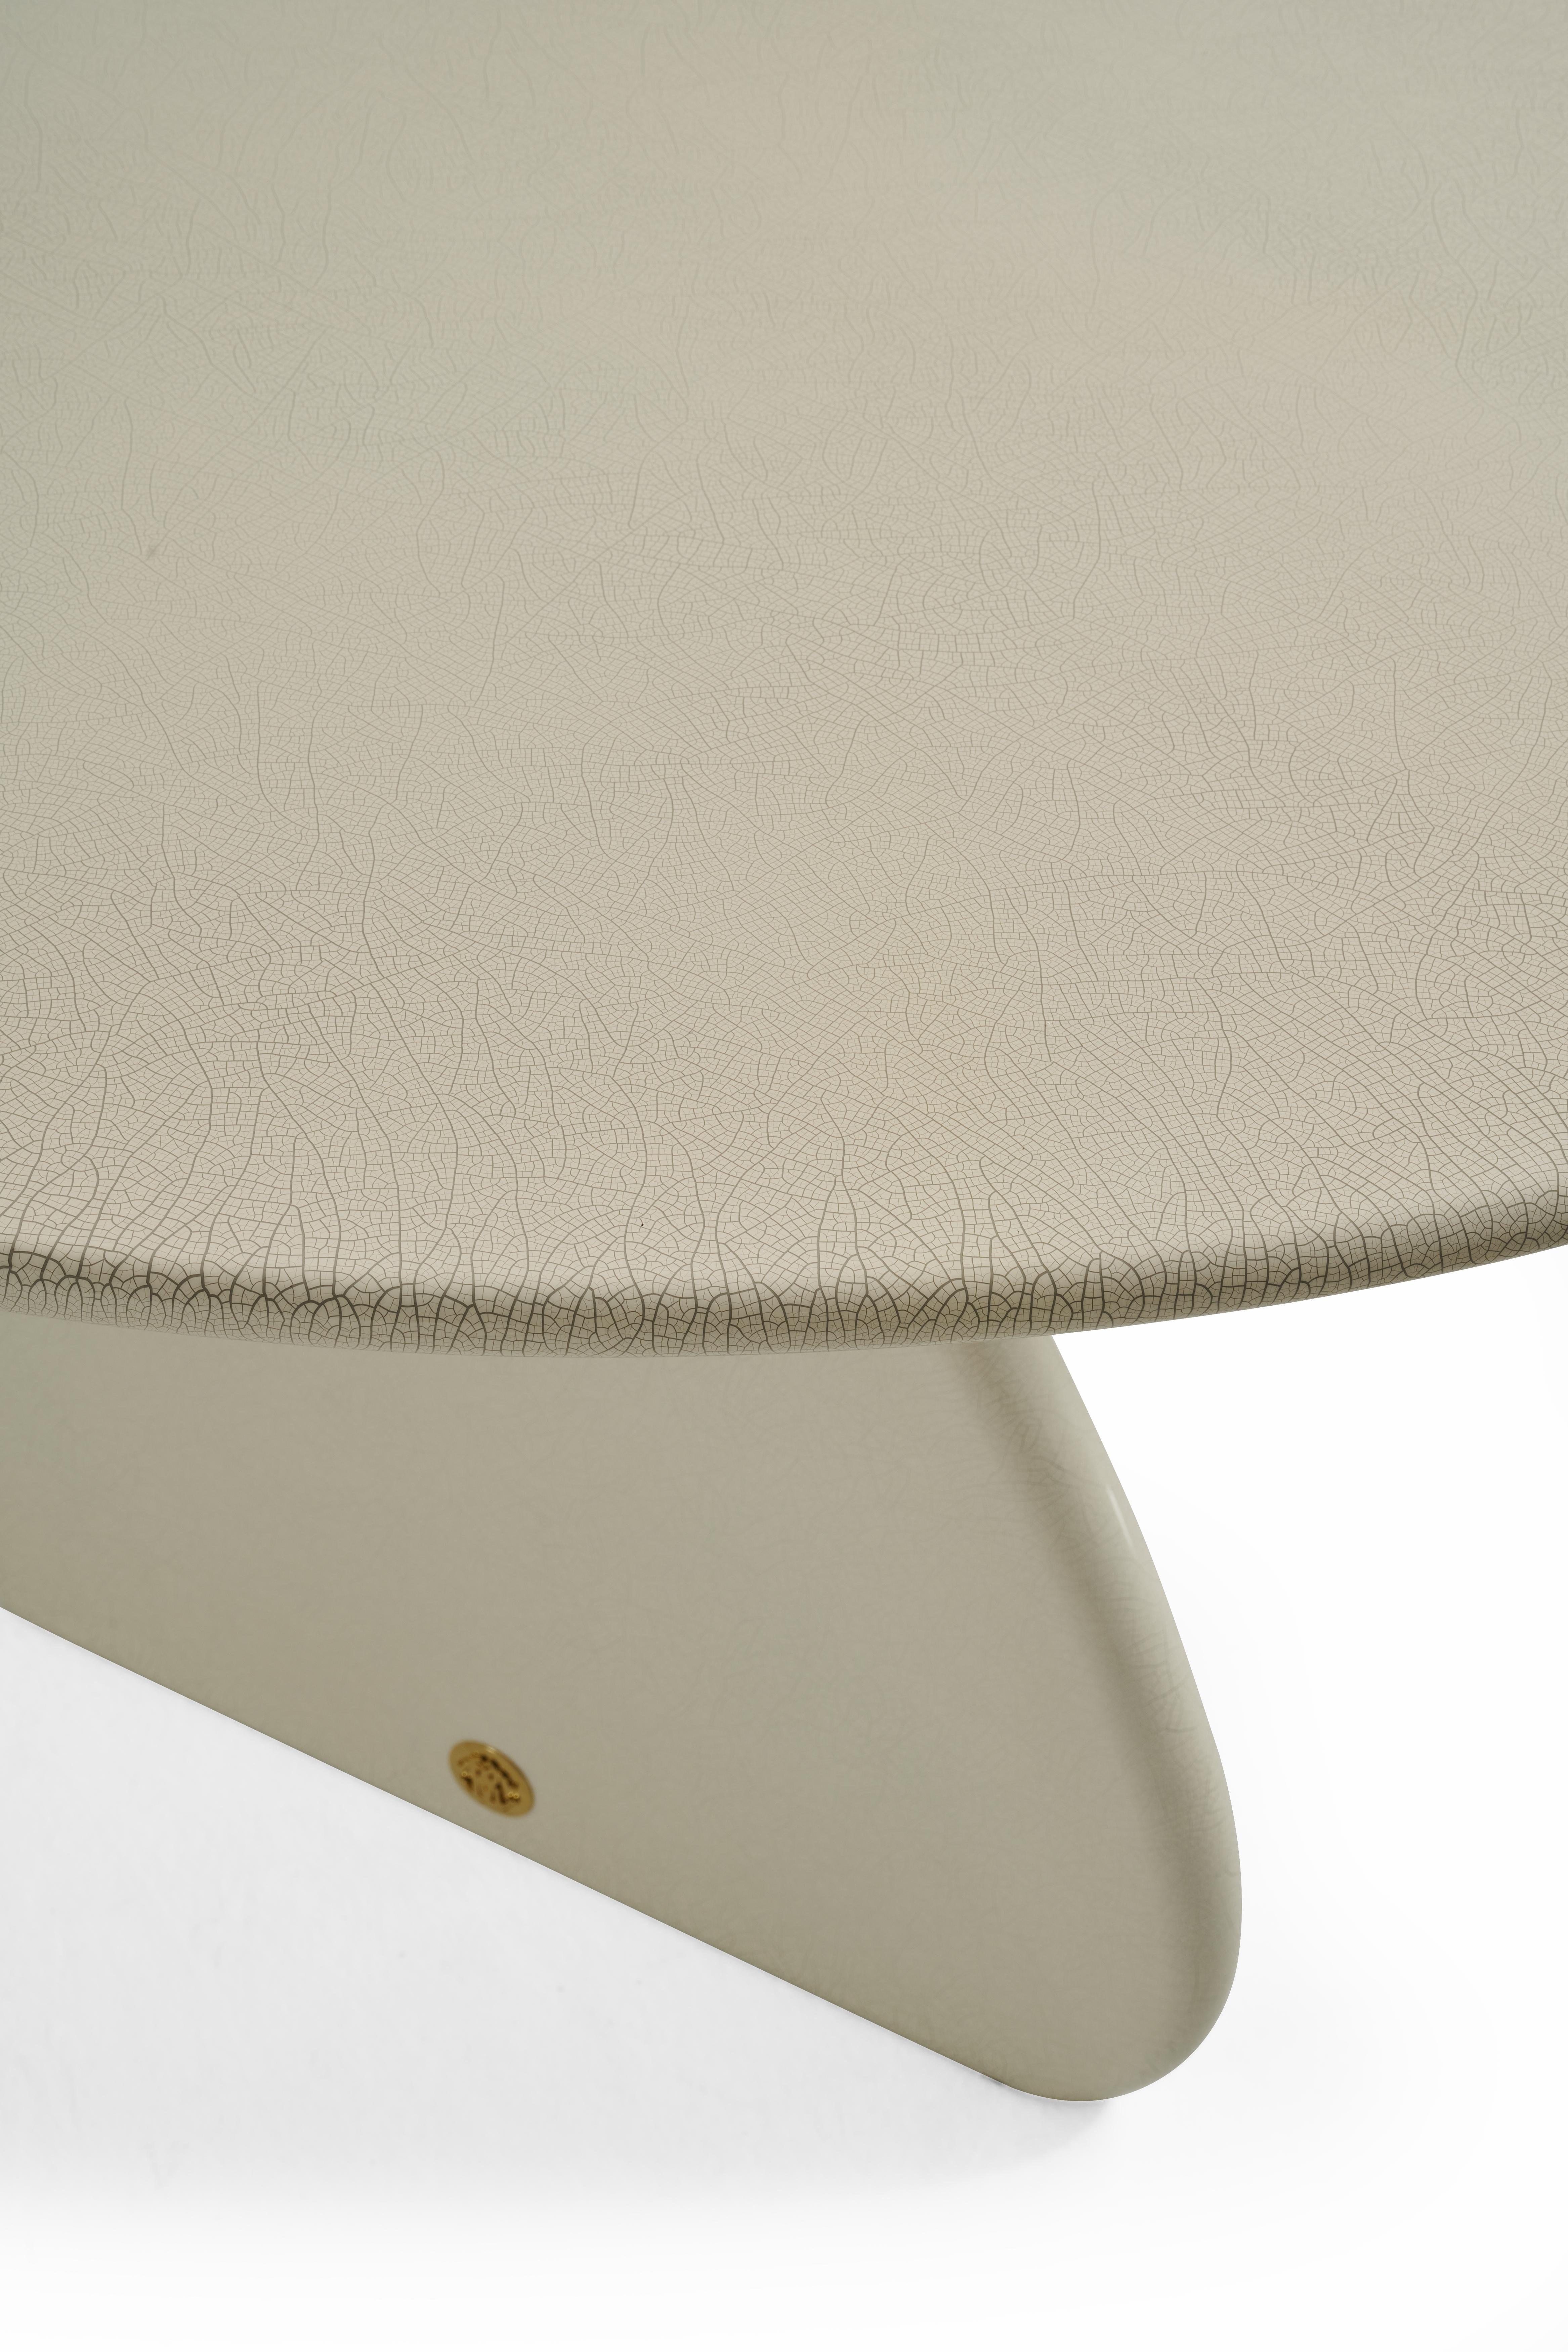 Contemporary Aldabra Table with Eggshell Finishing by Roberto Cavalli Home Interiors For Sale